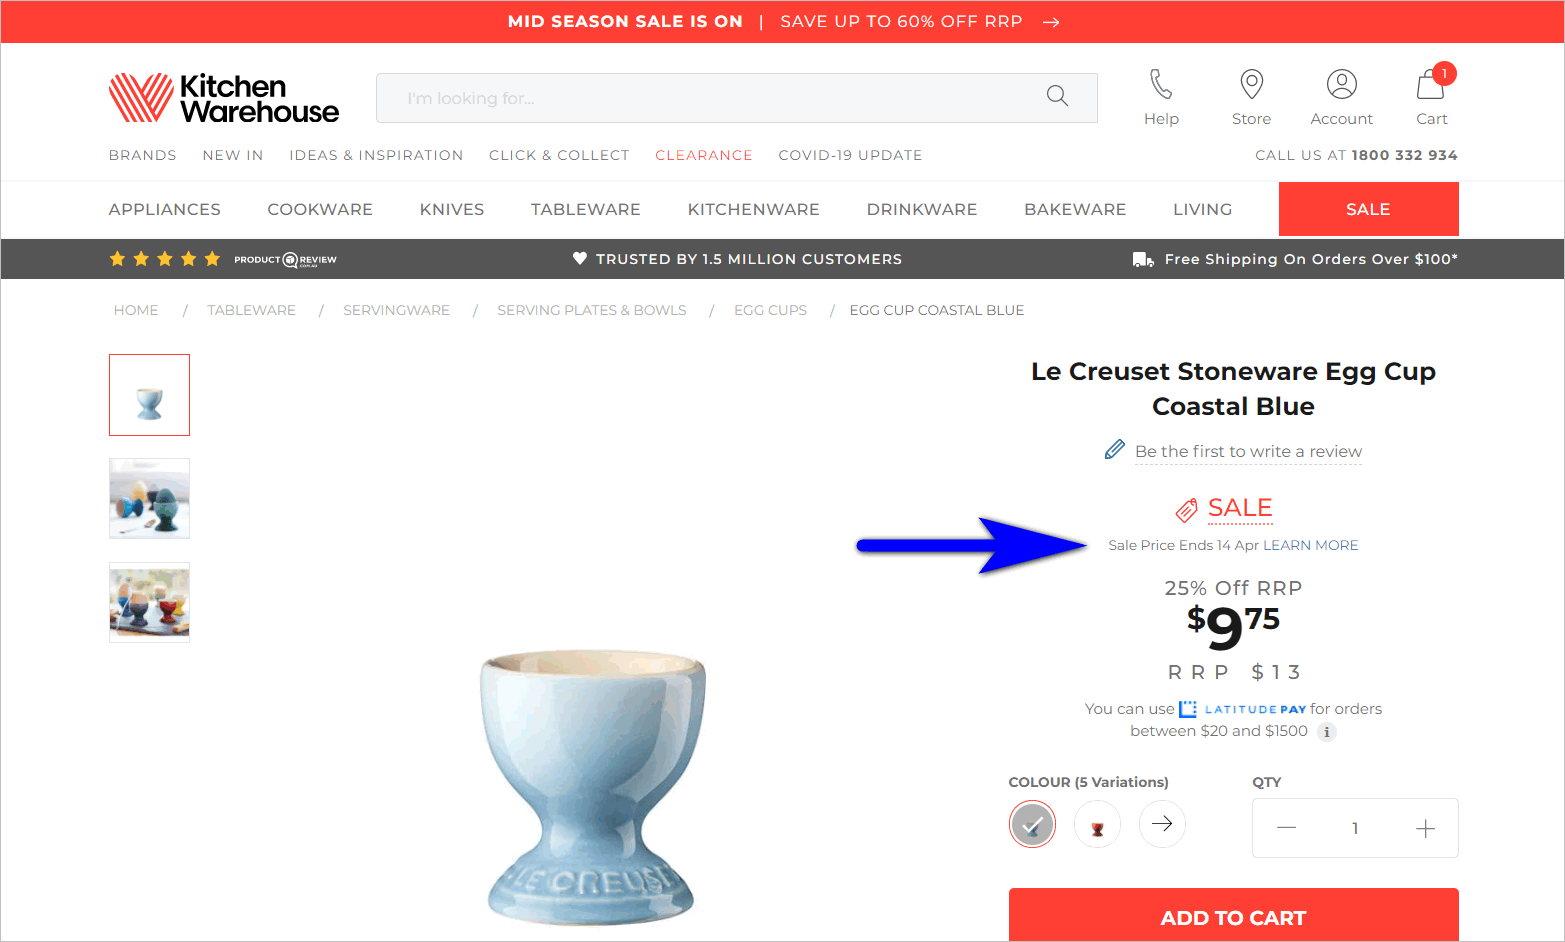 limited time offer example - kitchenwarehouse.com.au's product detail page for an item on sale shows the original price, the sale price, and the sale price end date